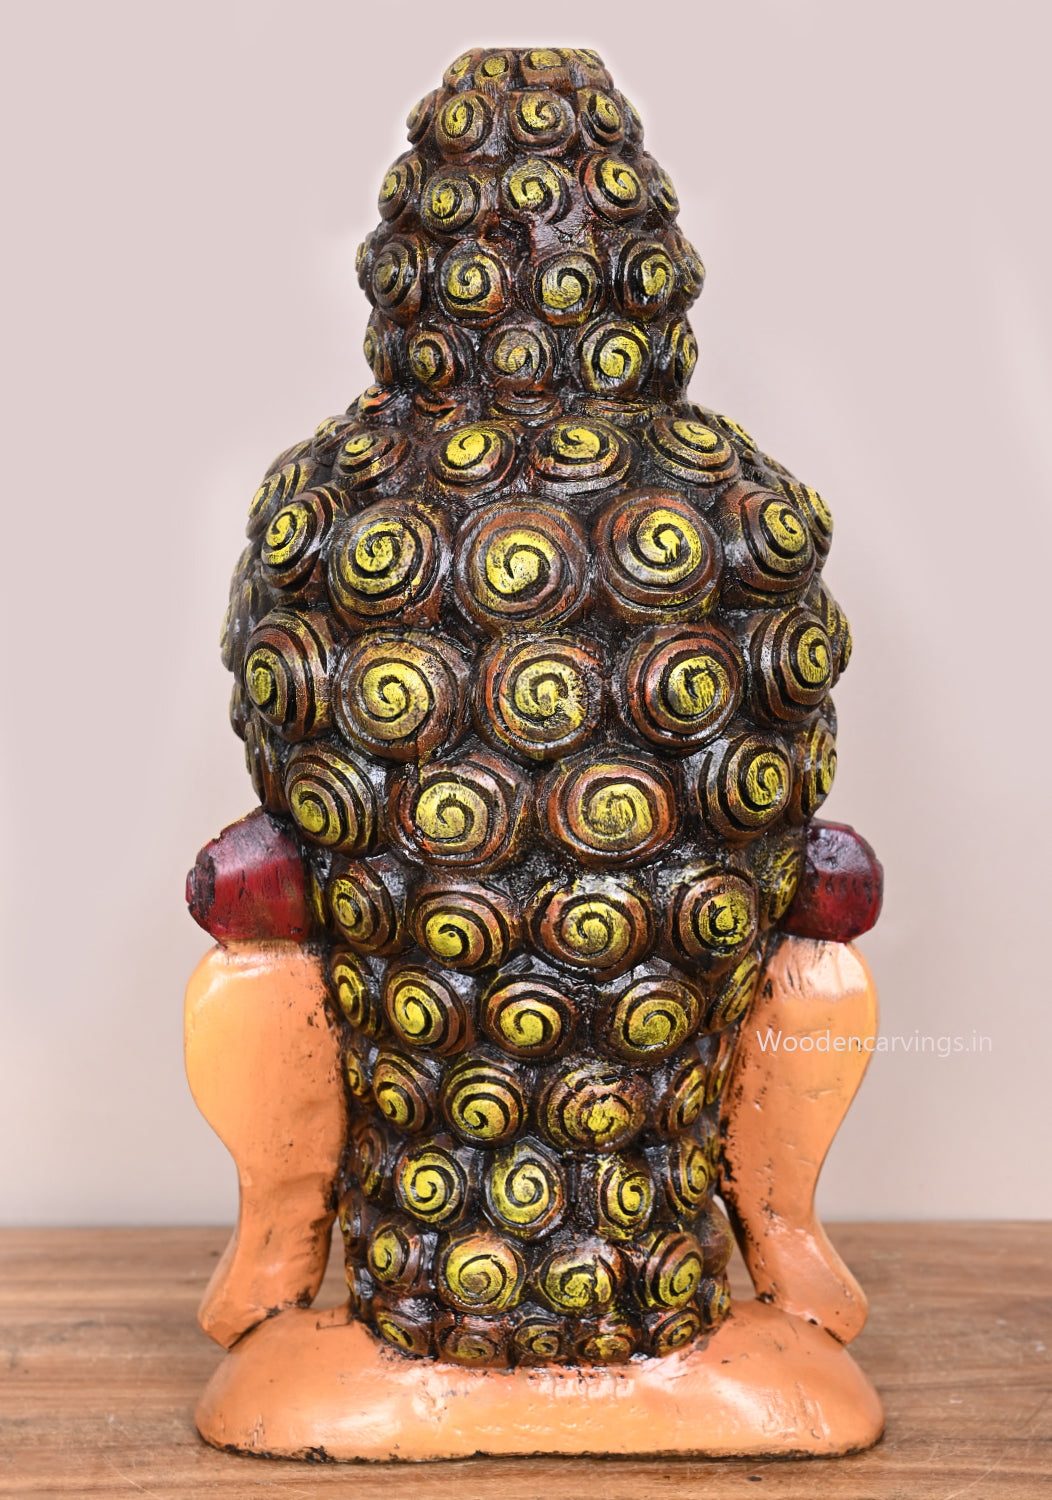 Snail Head Lord Buddha Multicolour Finishing Entrance Decoration Wooden Wall Mount Sculpture 20"